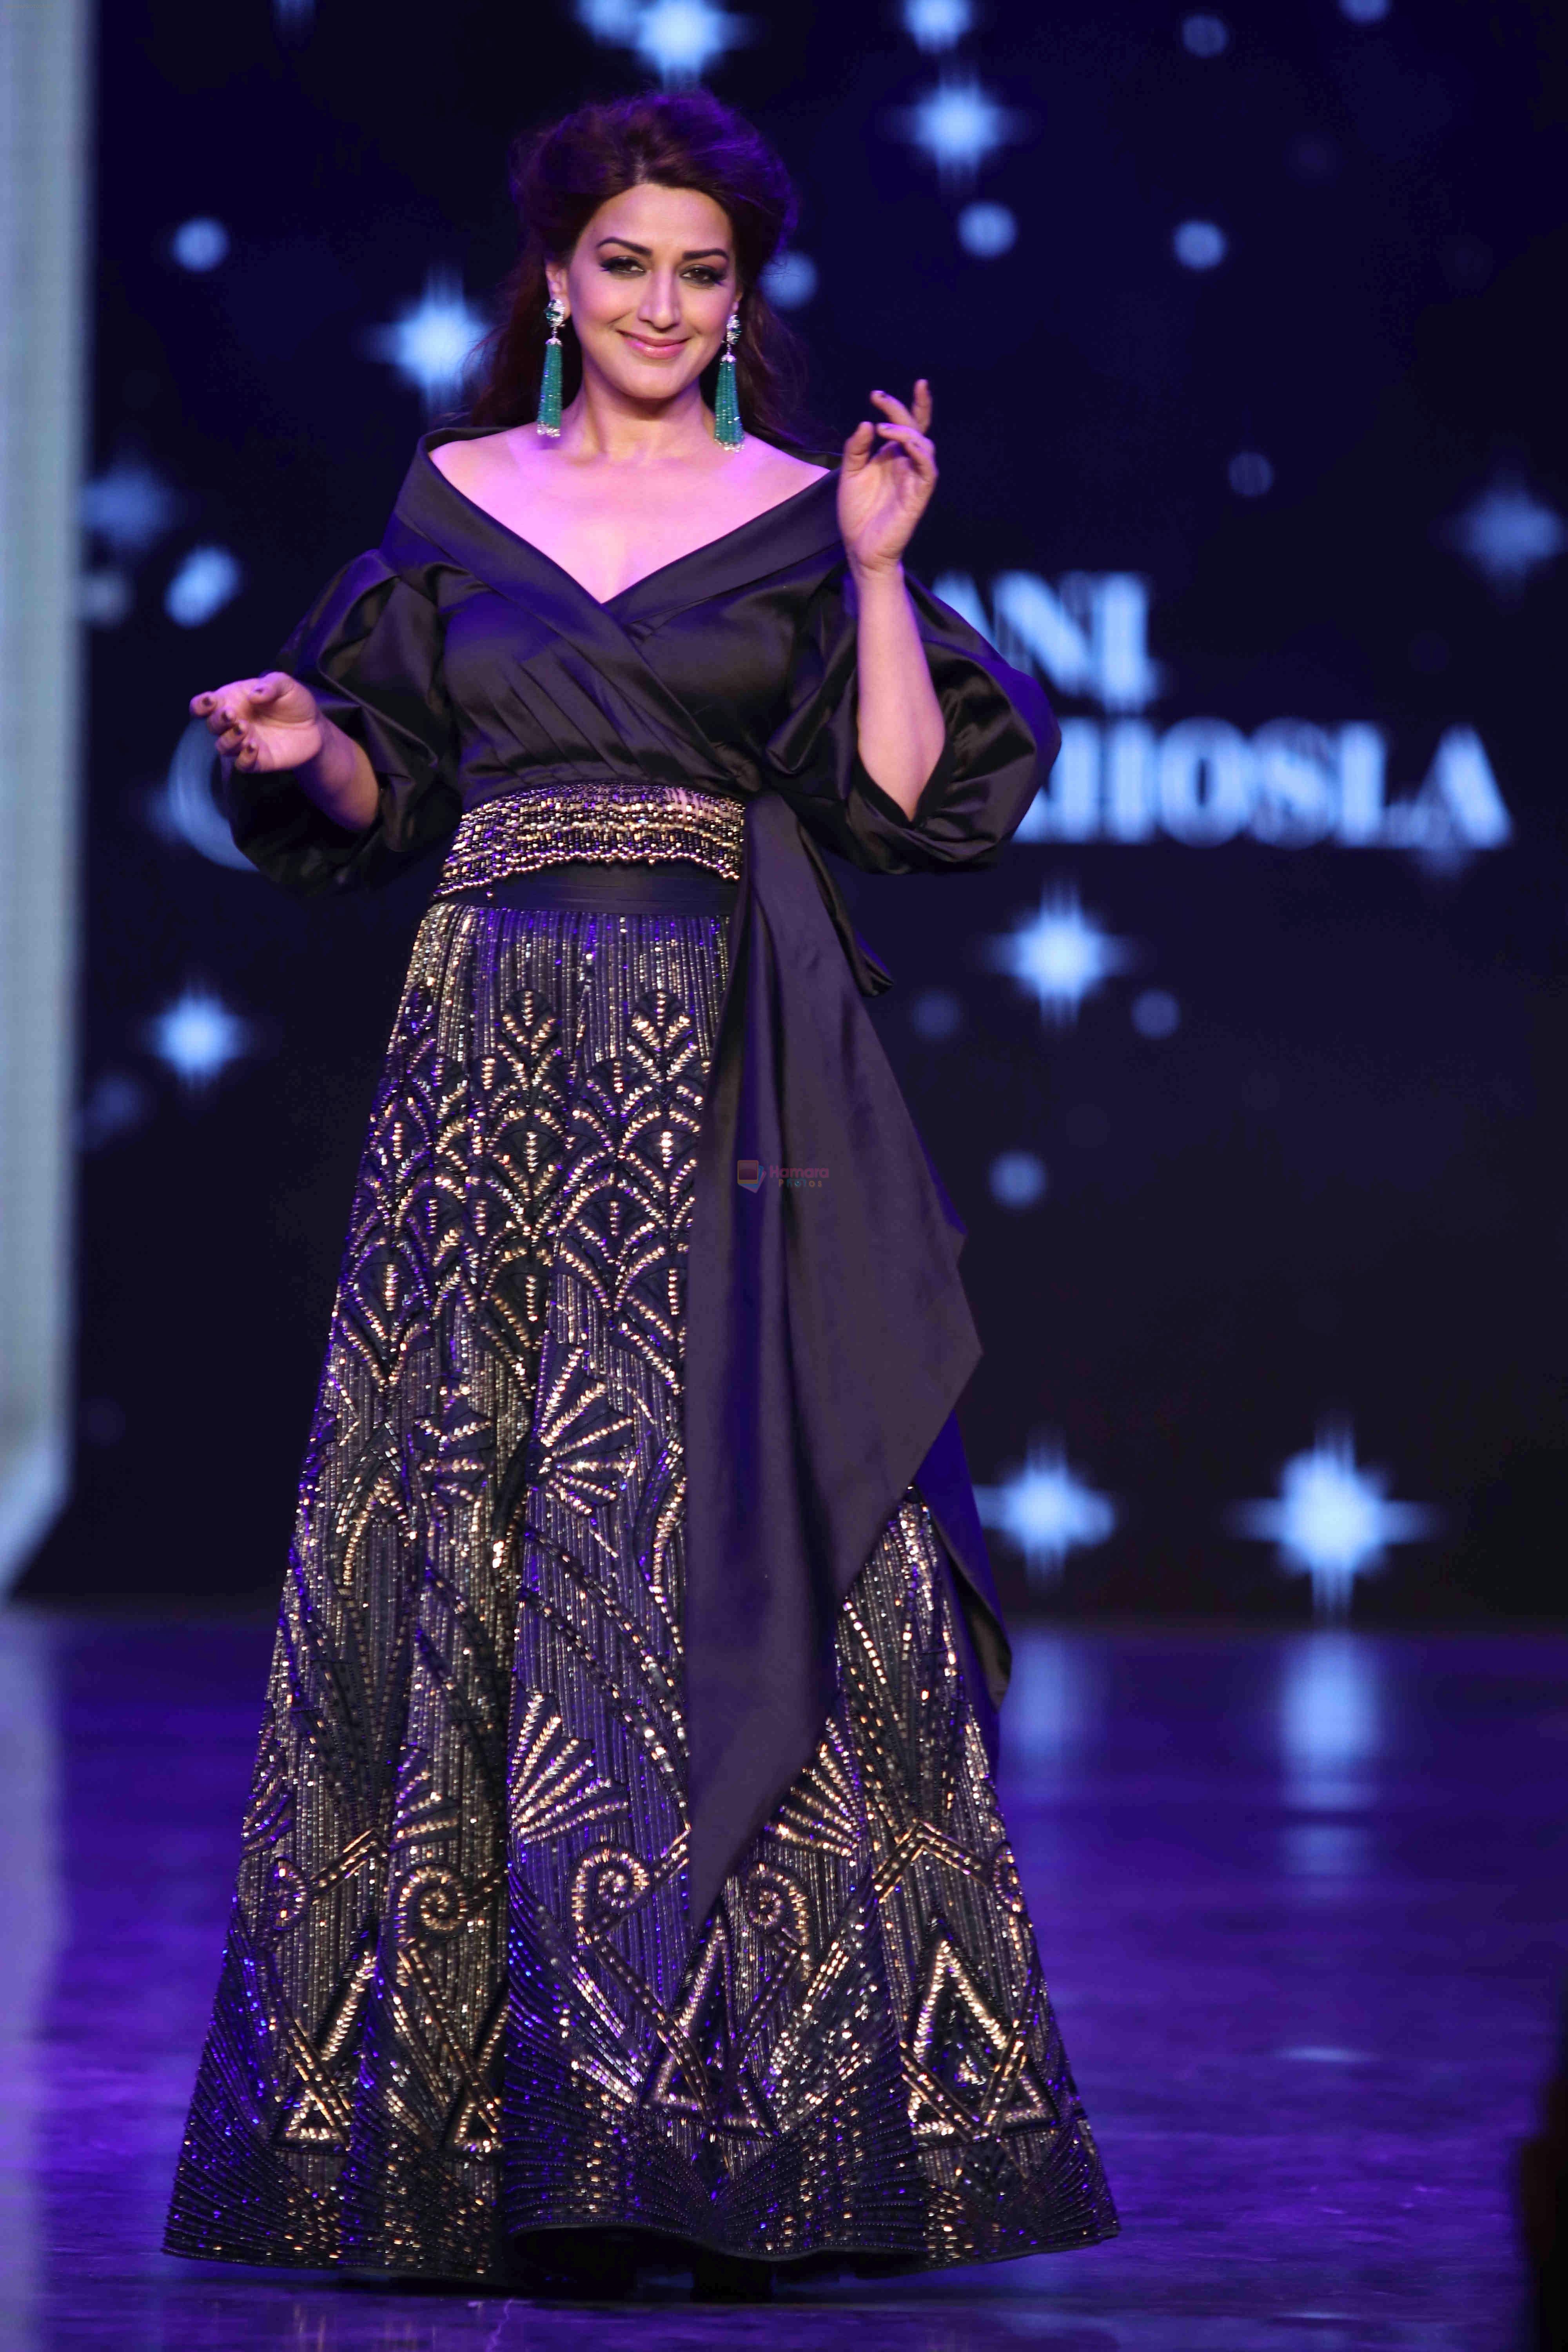 Sonali Bendre walk the ramp at 12th Annual Caring with Style fashion show